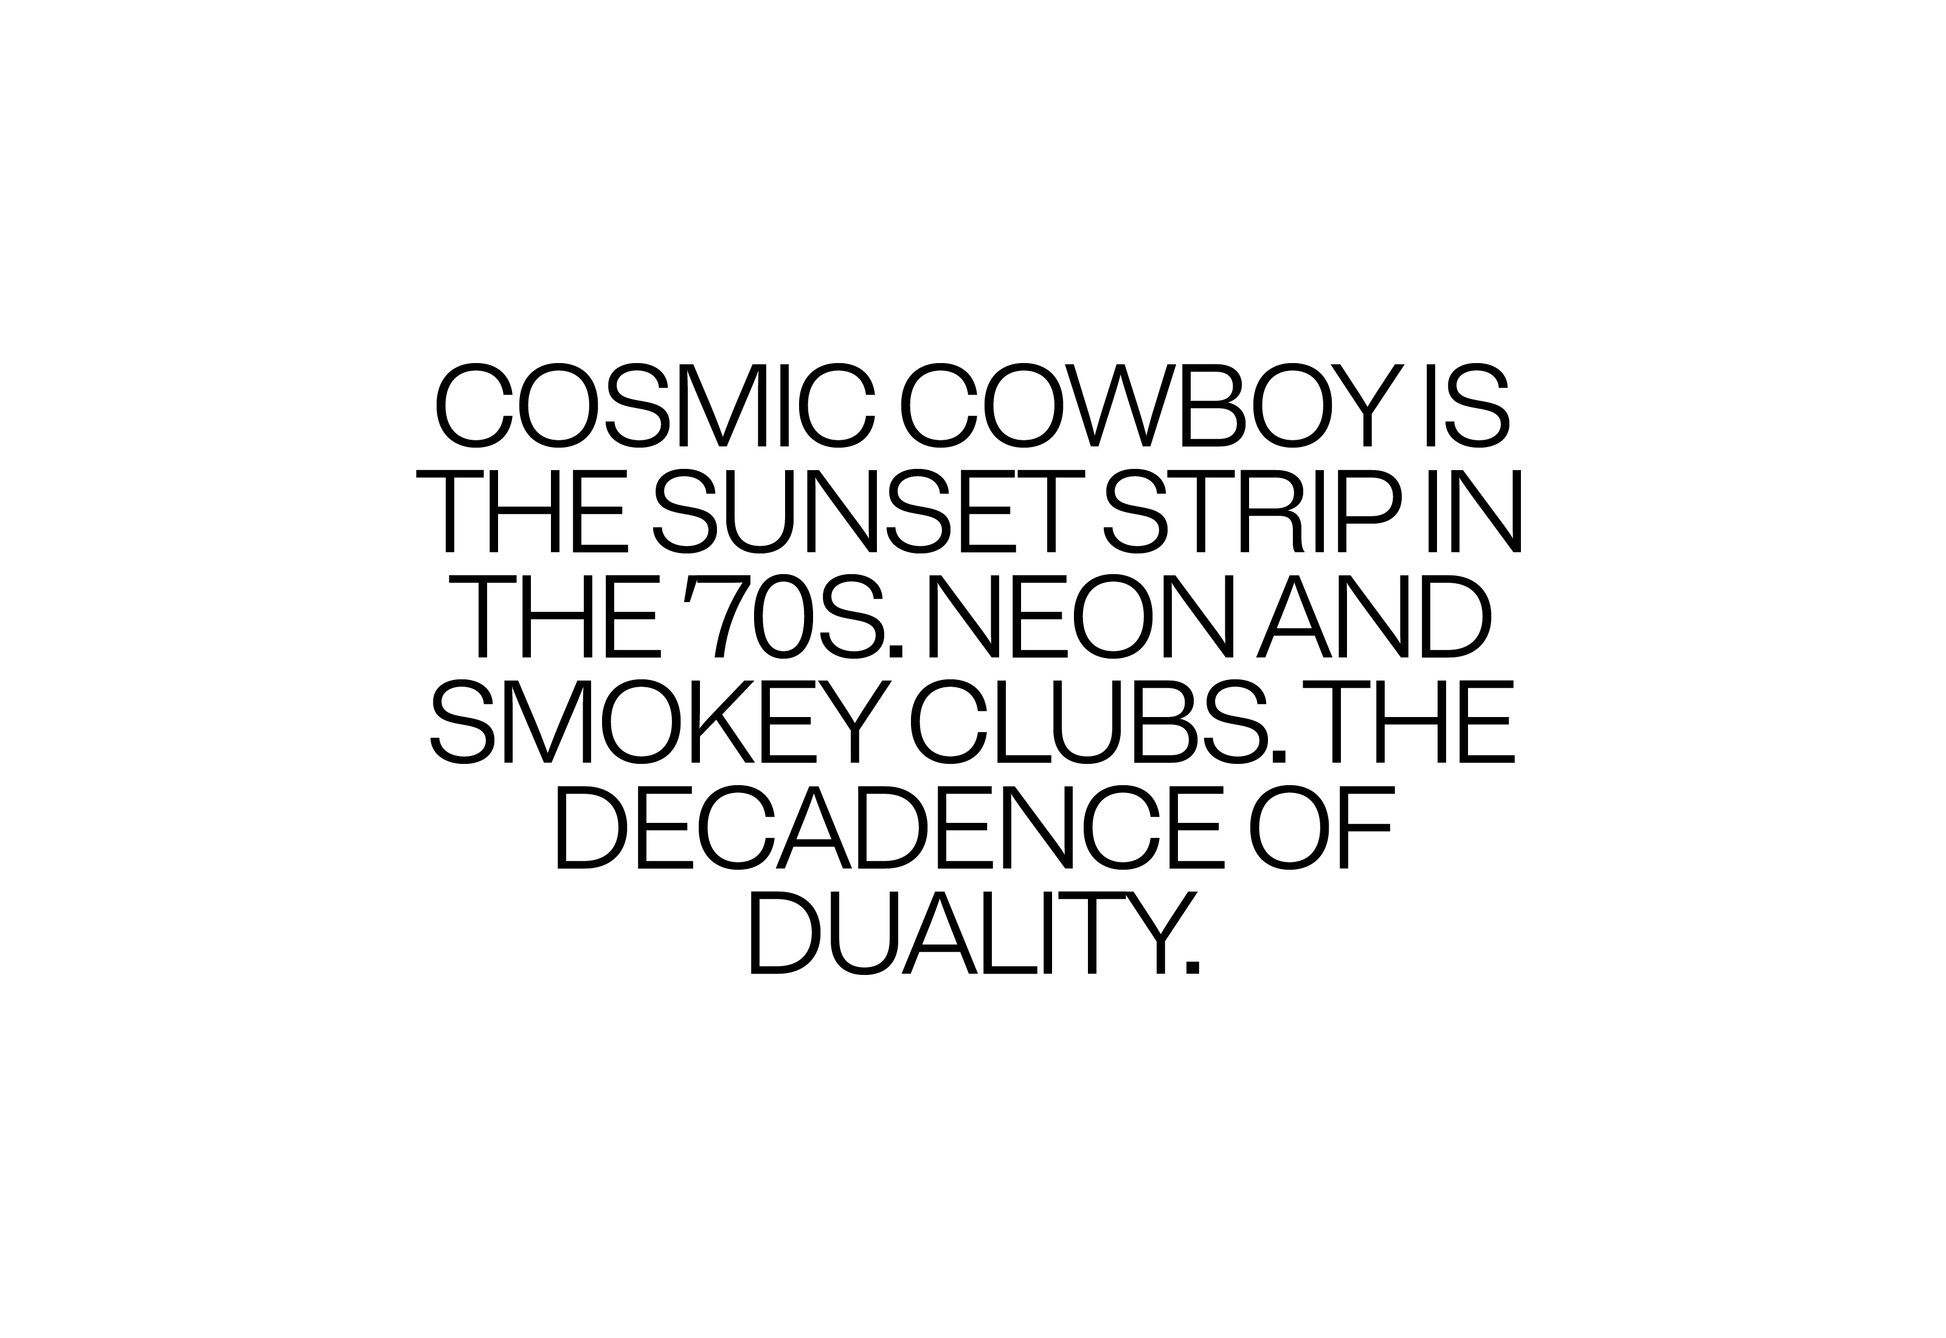 Cosmic Cowboy is The Sunset Strip in the '70s. Neon and smokey clubs. The decadence of duality.